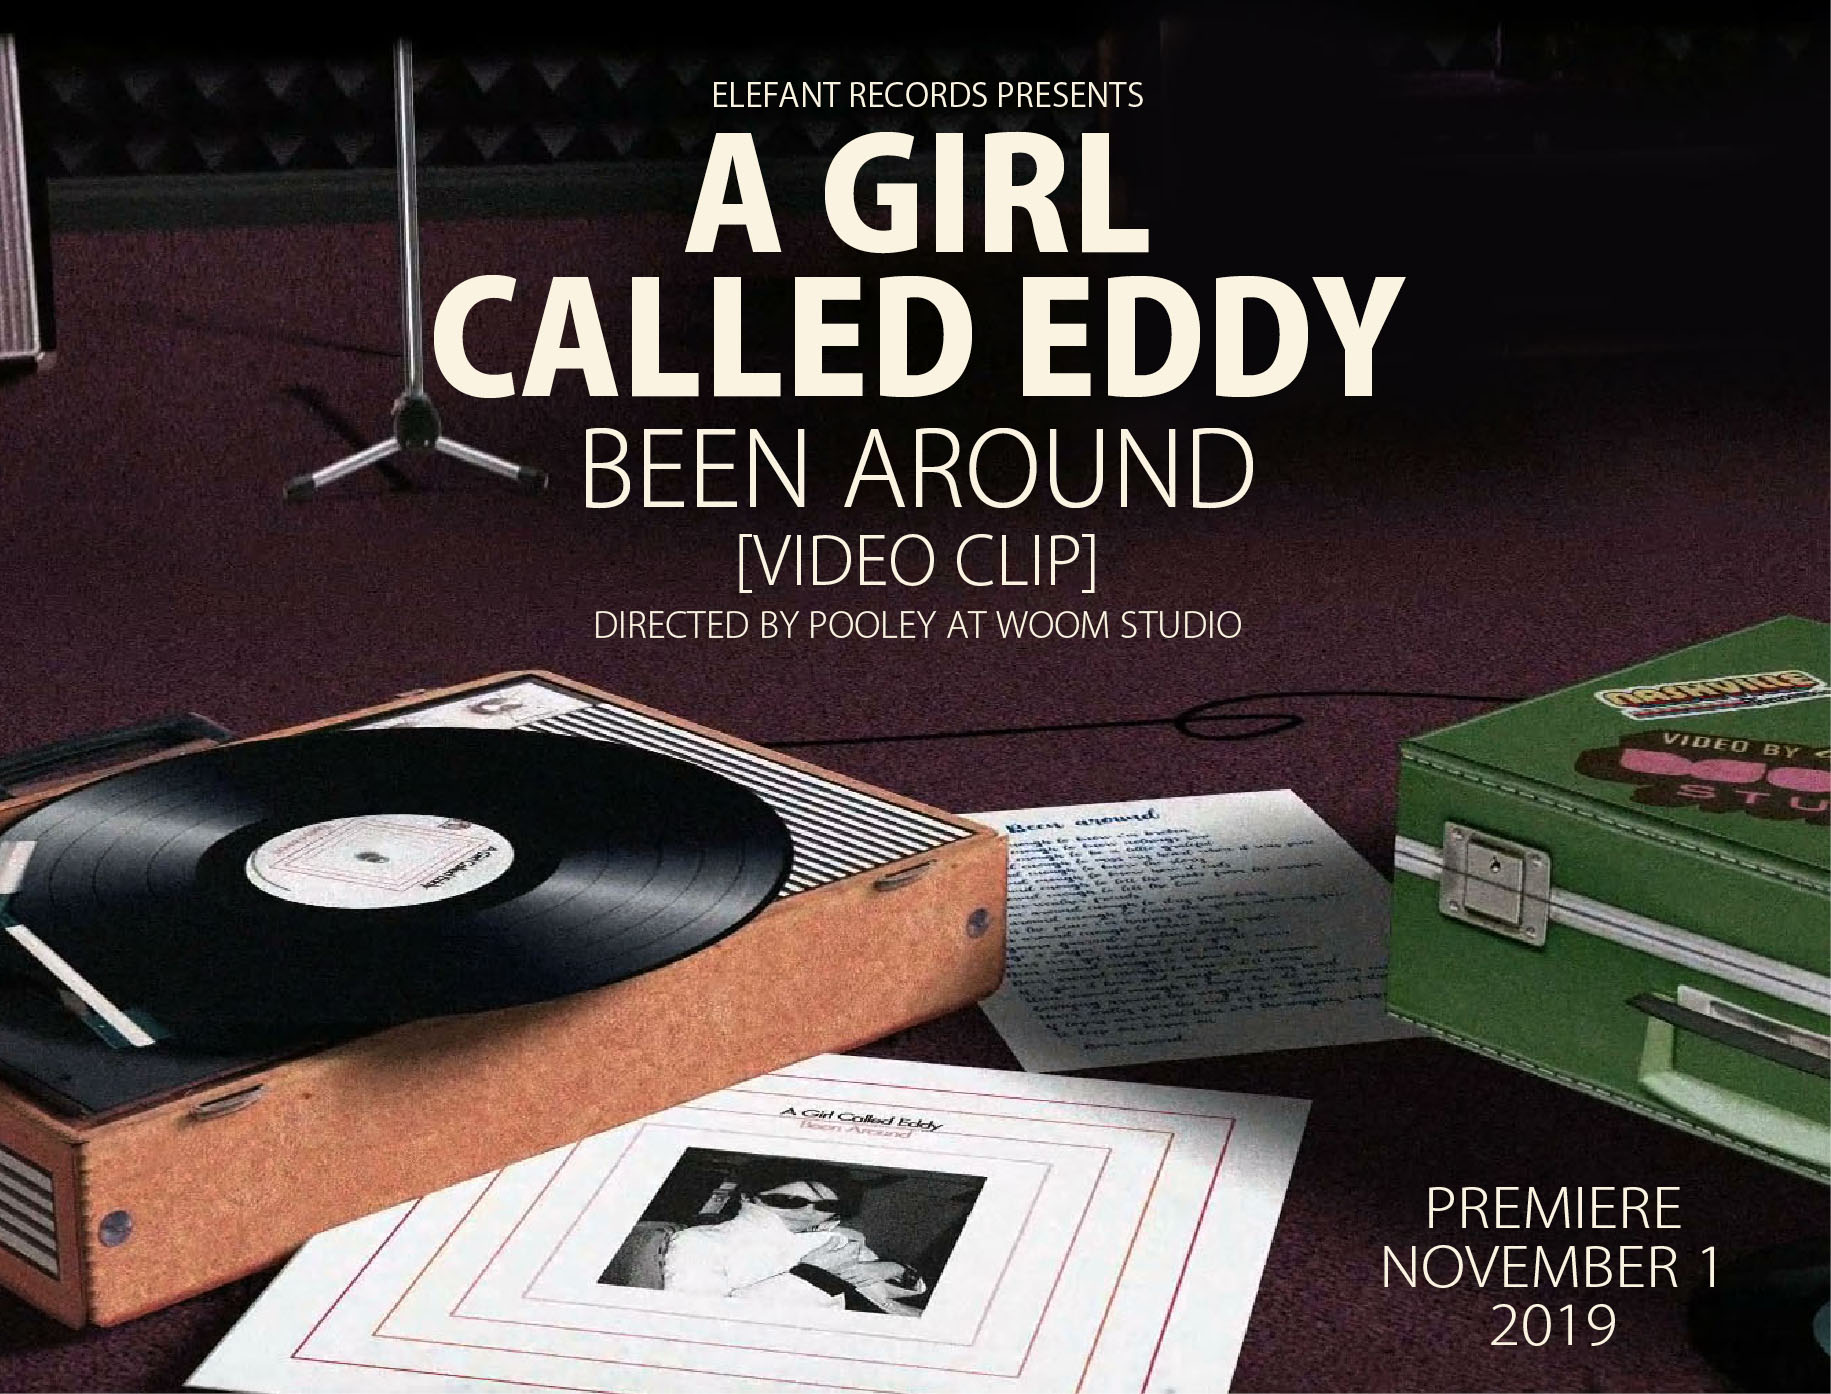 A Girl Called Eddy "Been Around"